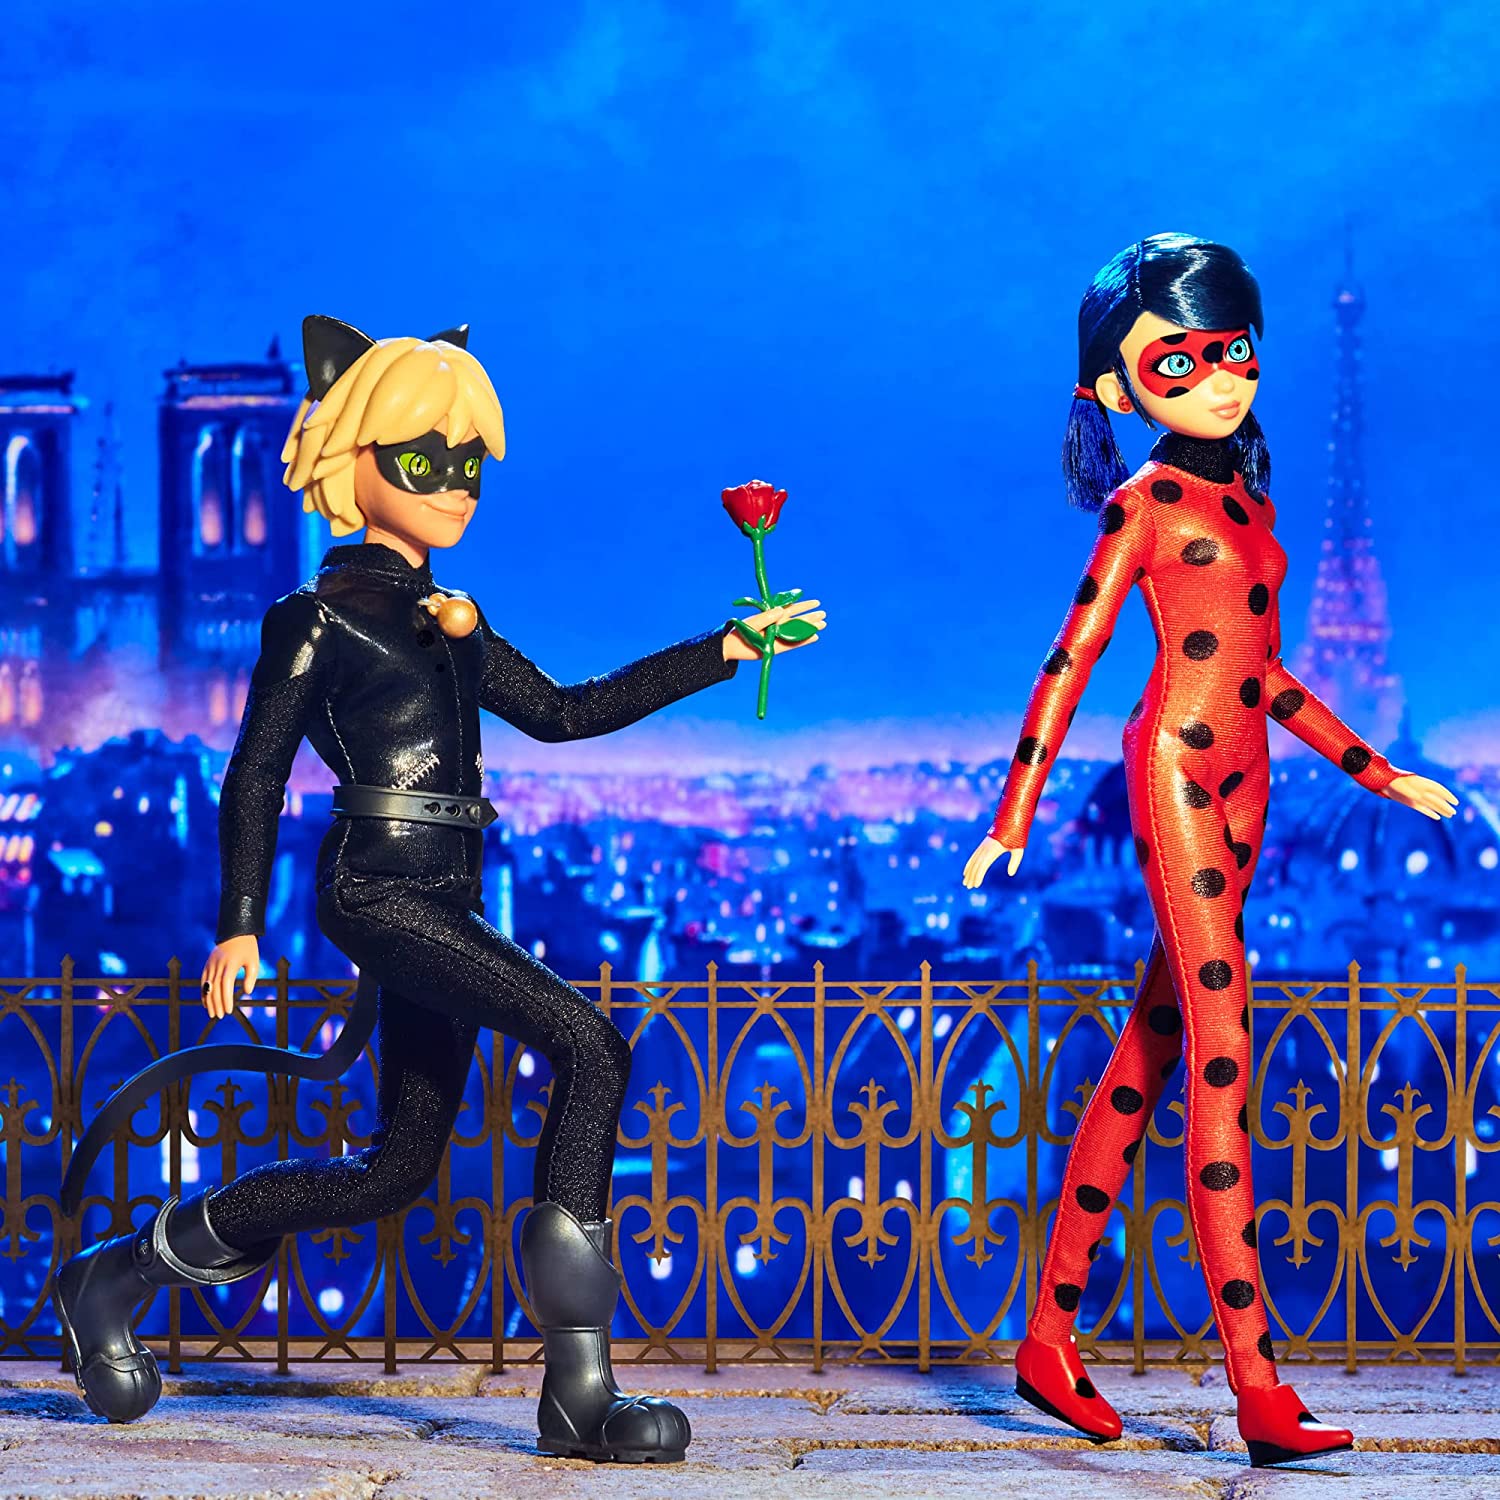 cielo oficina postal desvanecerse Miraculous Ladybug and Cat Noir Awakening Movie dolls: Marinette Collector  fashion doll, 2 pack deluxe set and more - YouLoveIt.com